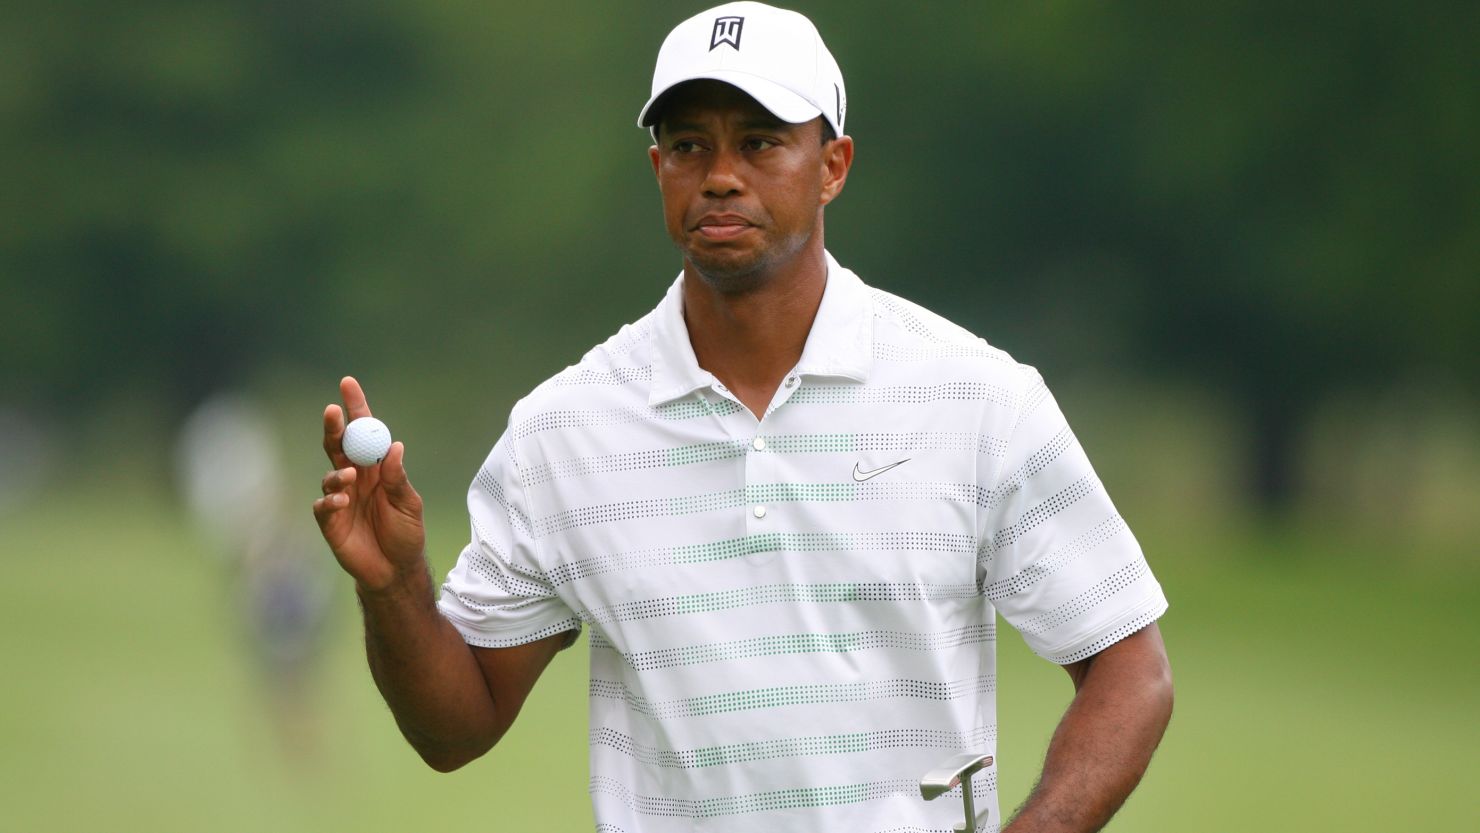 Tiger Woods has 74 PGA Tour victories to his name but is still searching for his 15th major title